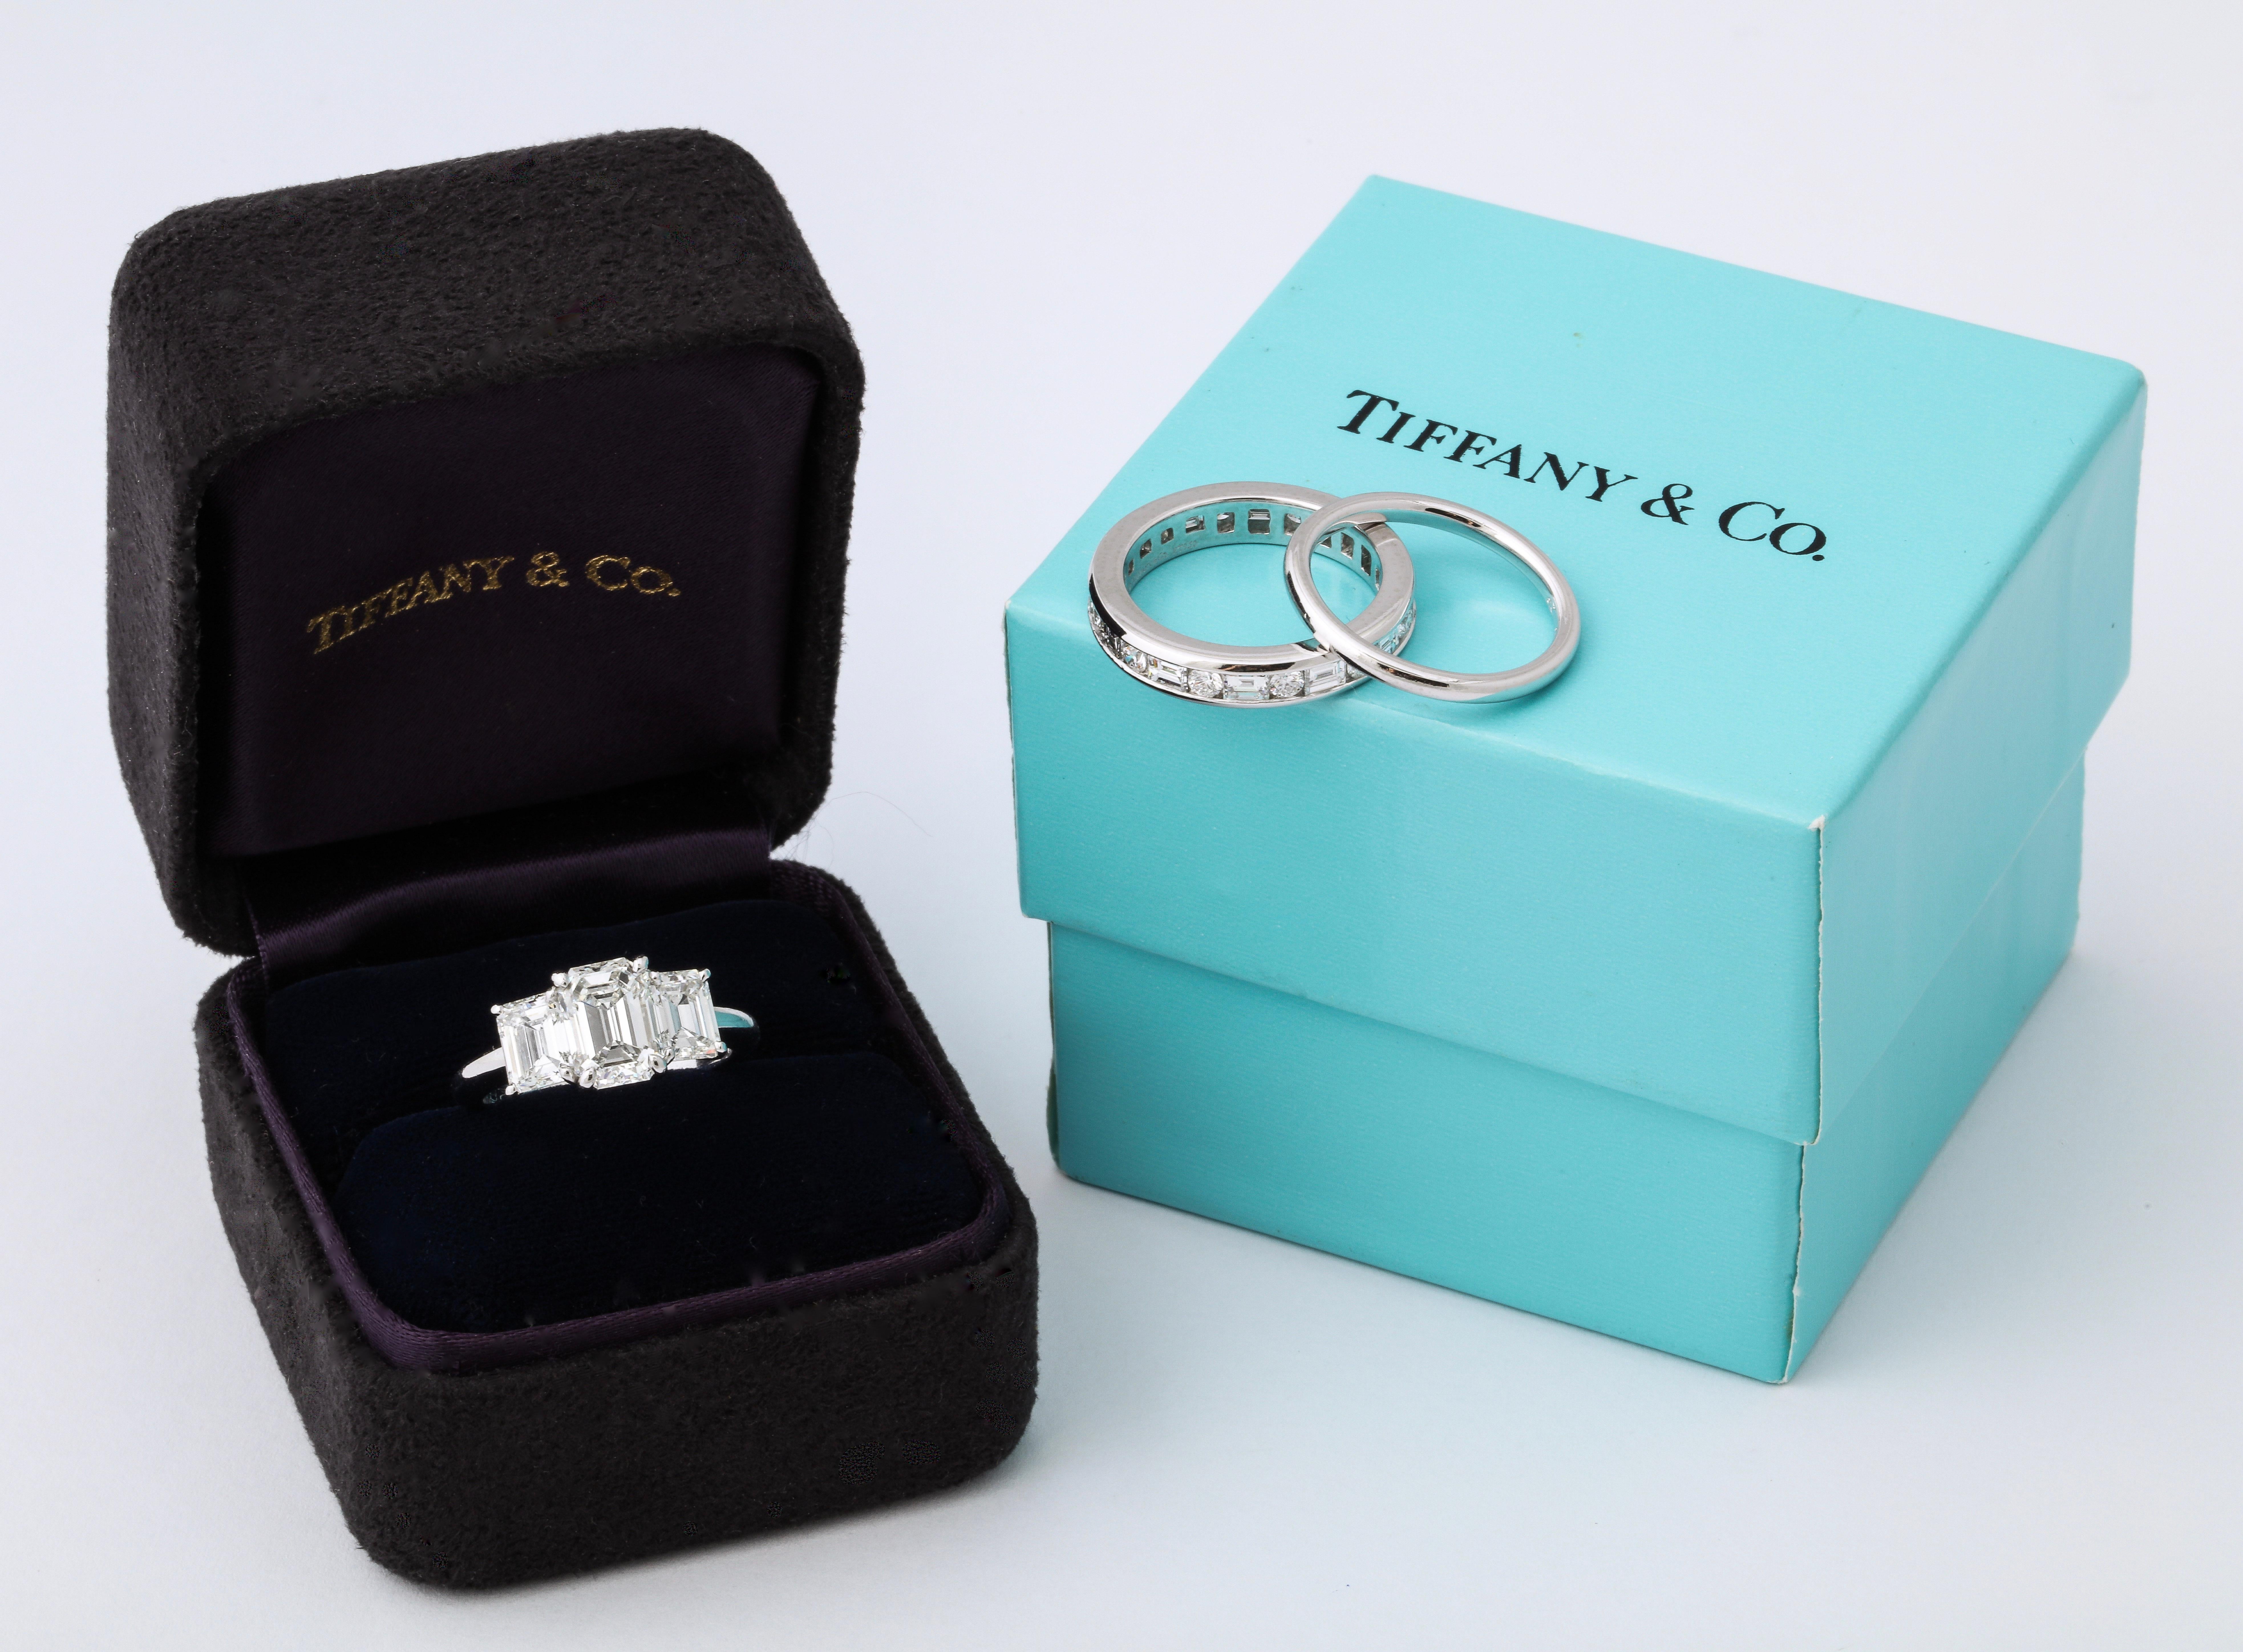 This completely intact set consisting of an emerald cut three stone diamond engagement ring, a diamond eternity band and a platinum wedding band is an extremely rare find in today's market.  The set even comes complete with the original Tiffany &